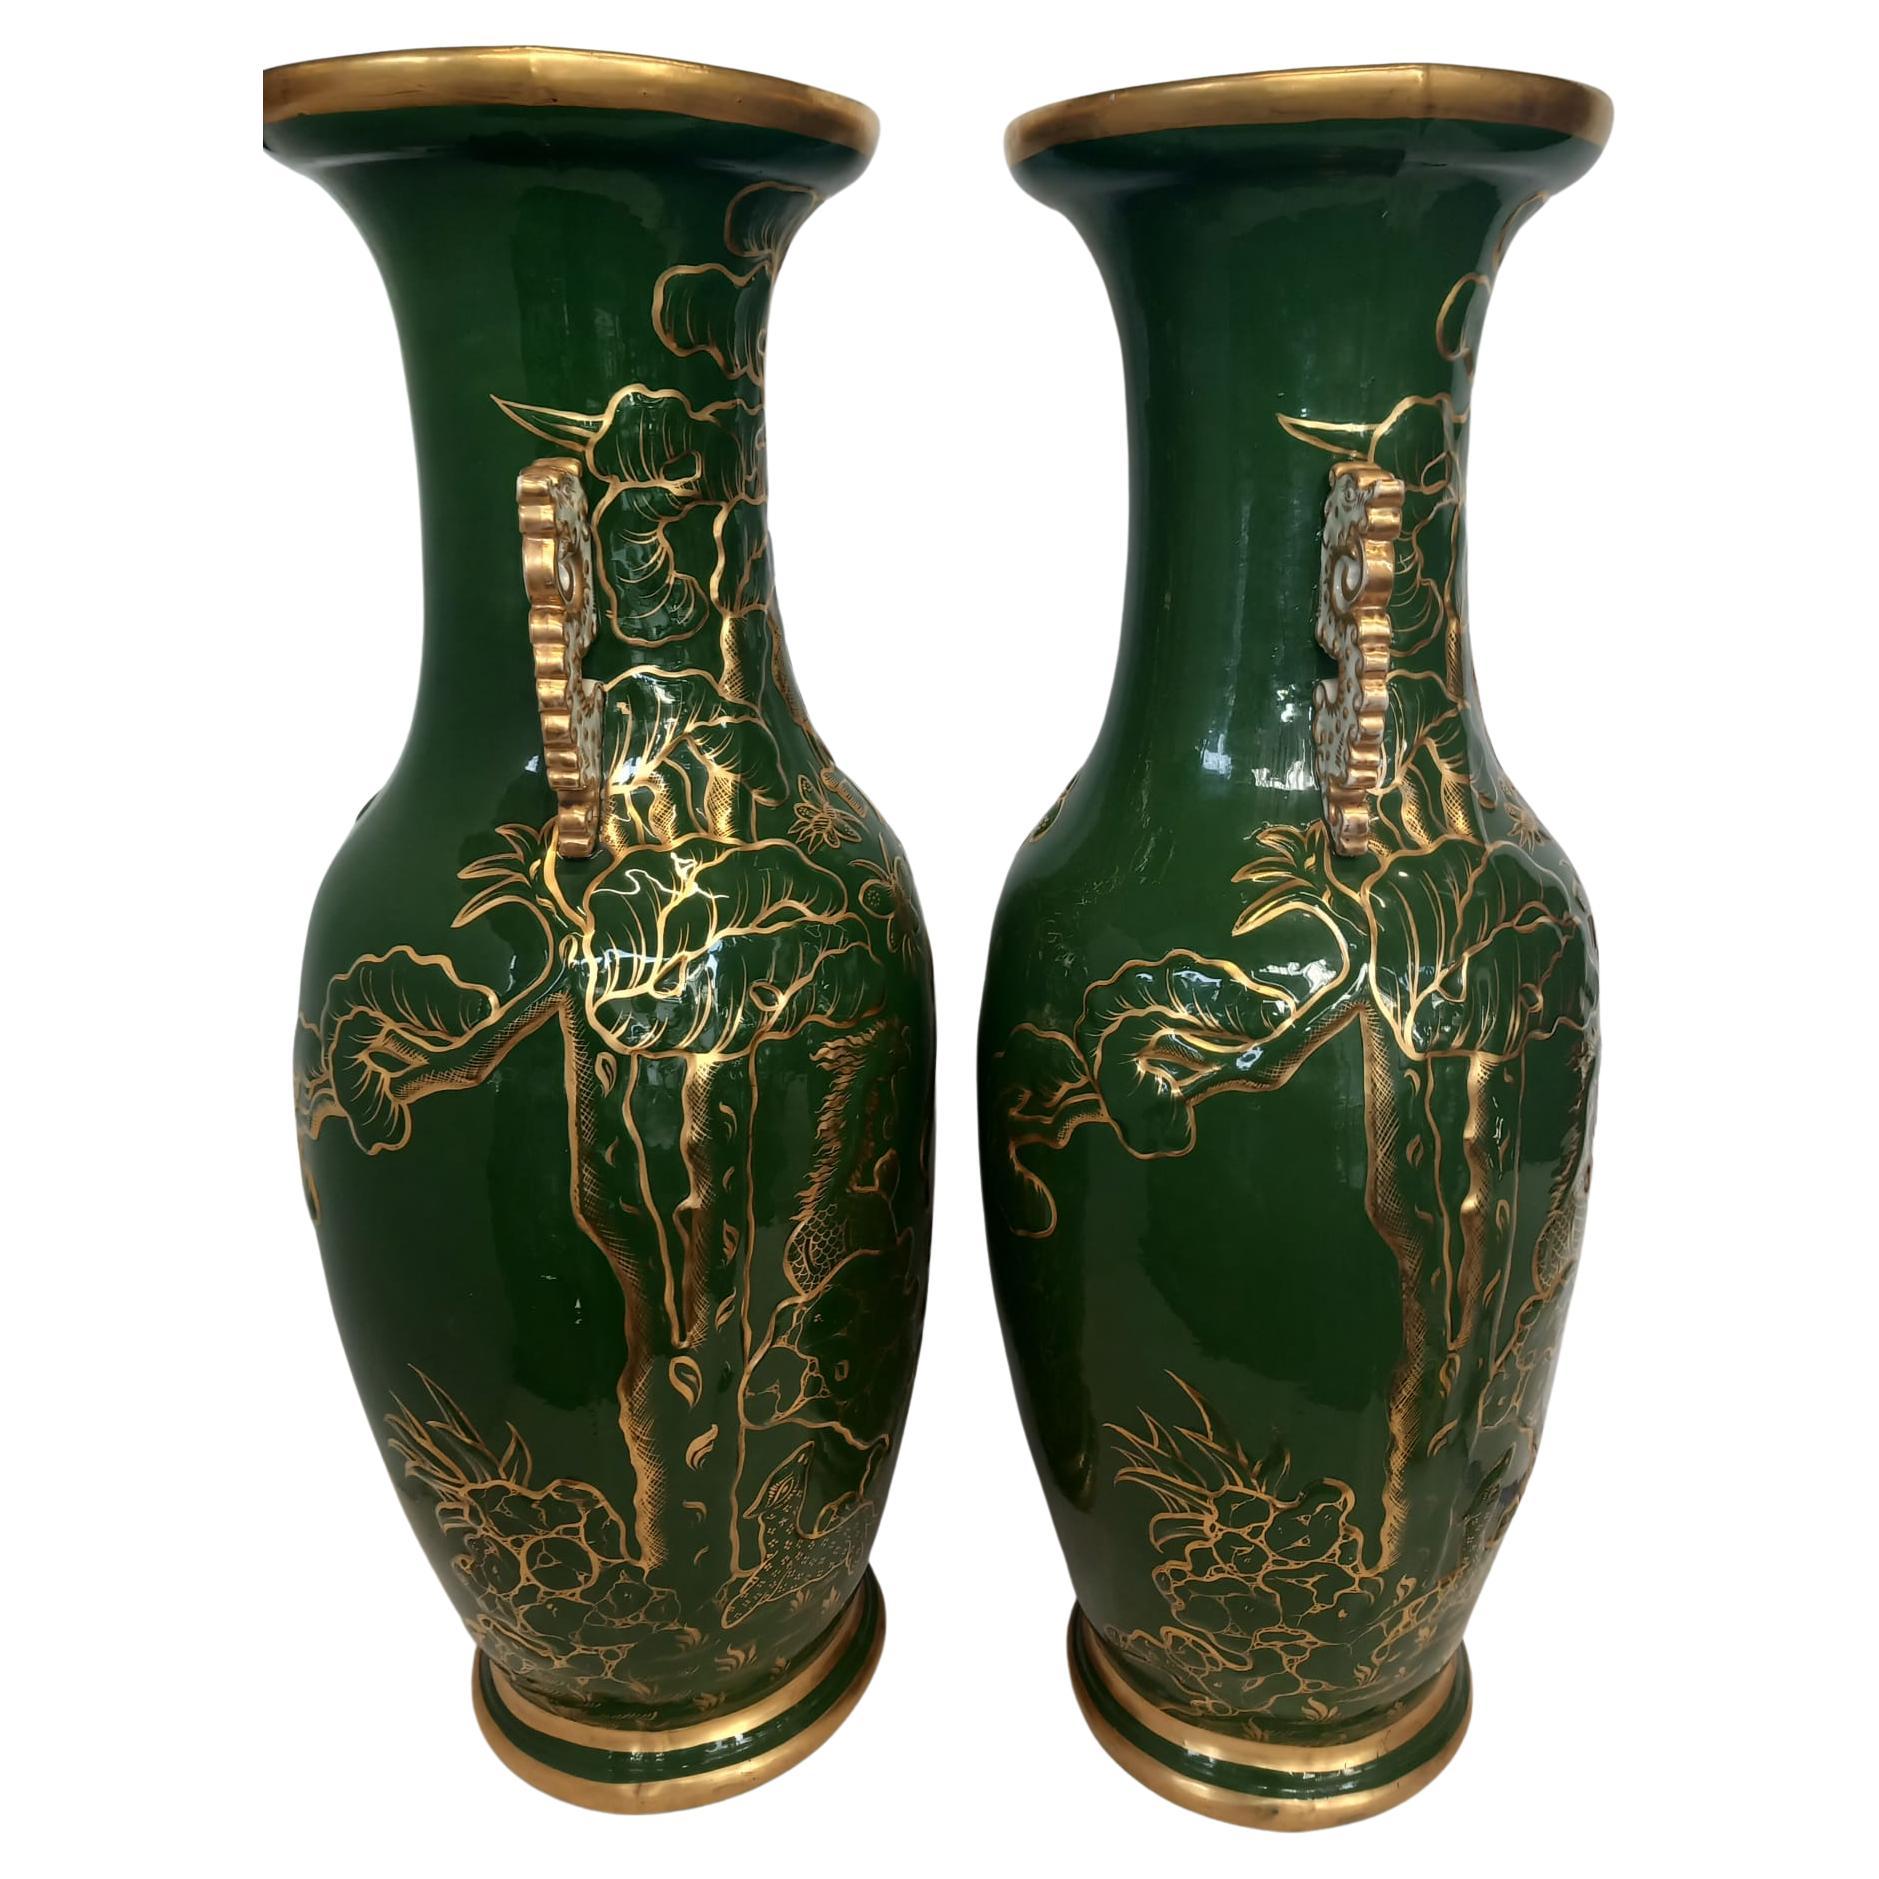 A pair of antique English ironstone vases dating from the mid nineteenth century. 
Hand decorated with gilded butterflies and moths , birds and foliage on a dark olive green background , with white and gold Chinoiserie style handles . 
These large